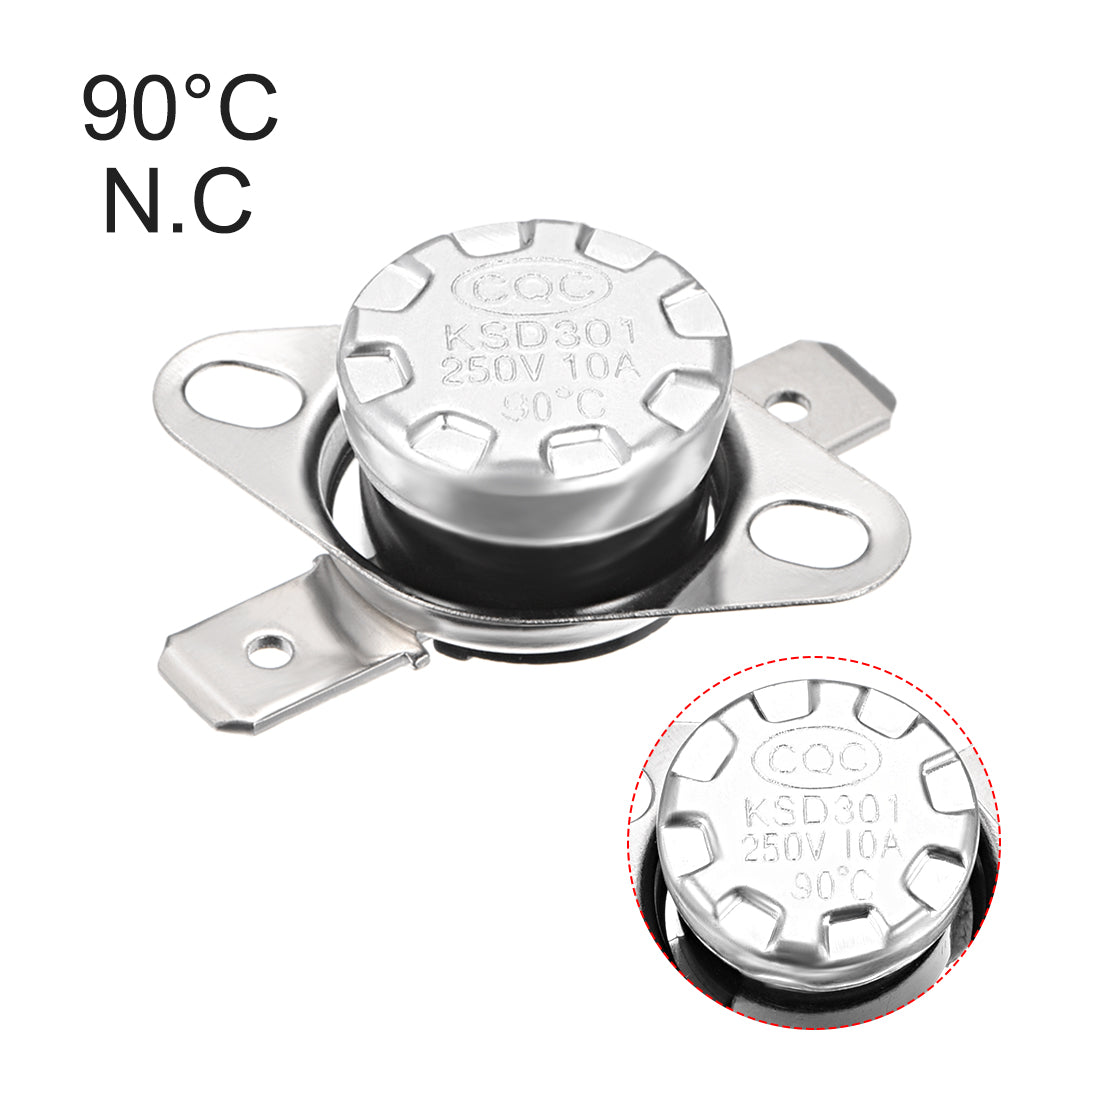 uxcell Uxcell Temperature Control Switch , Thermostat , KSD301 90°C 10A , Normally Closed N.C 5pcs